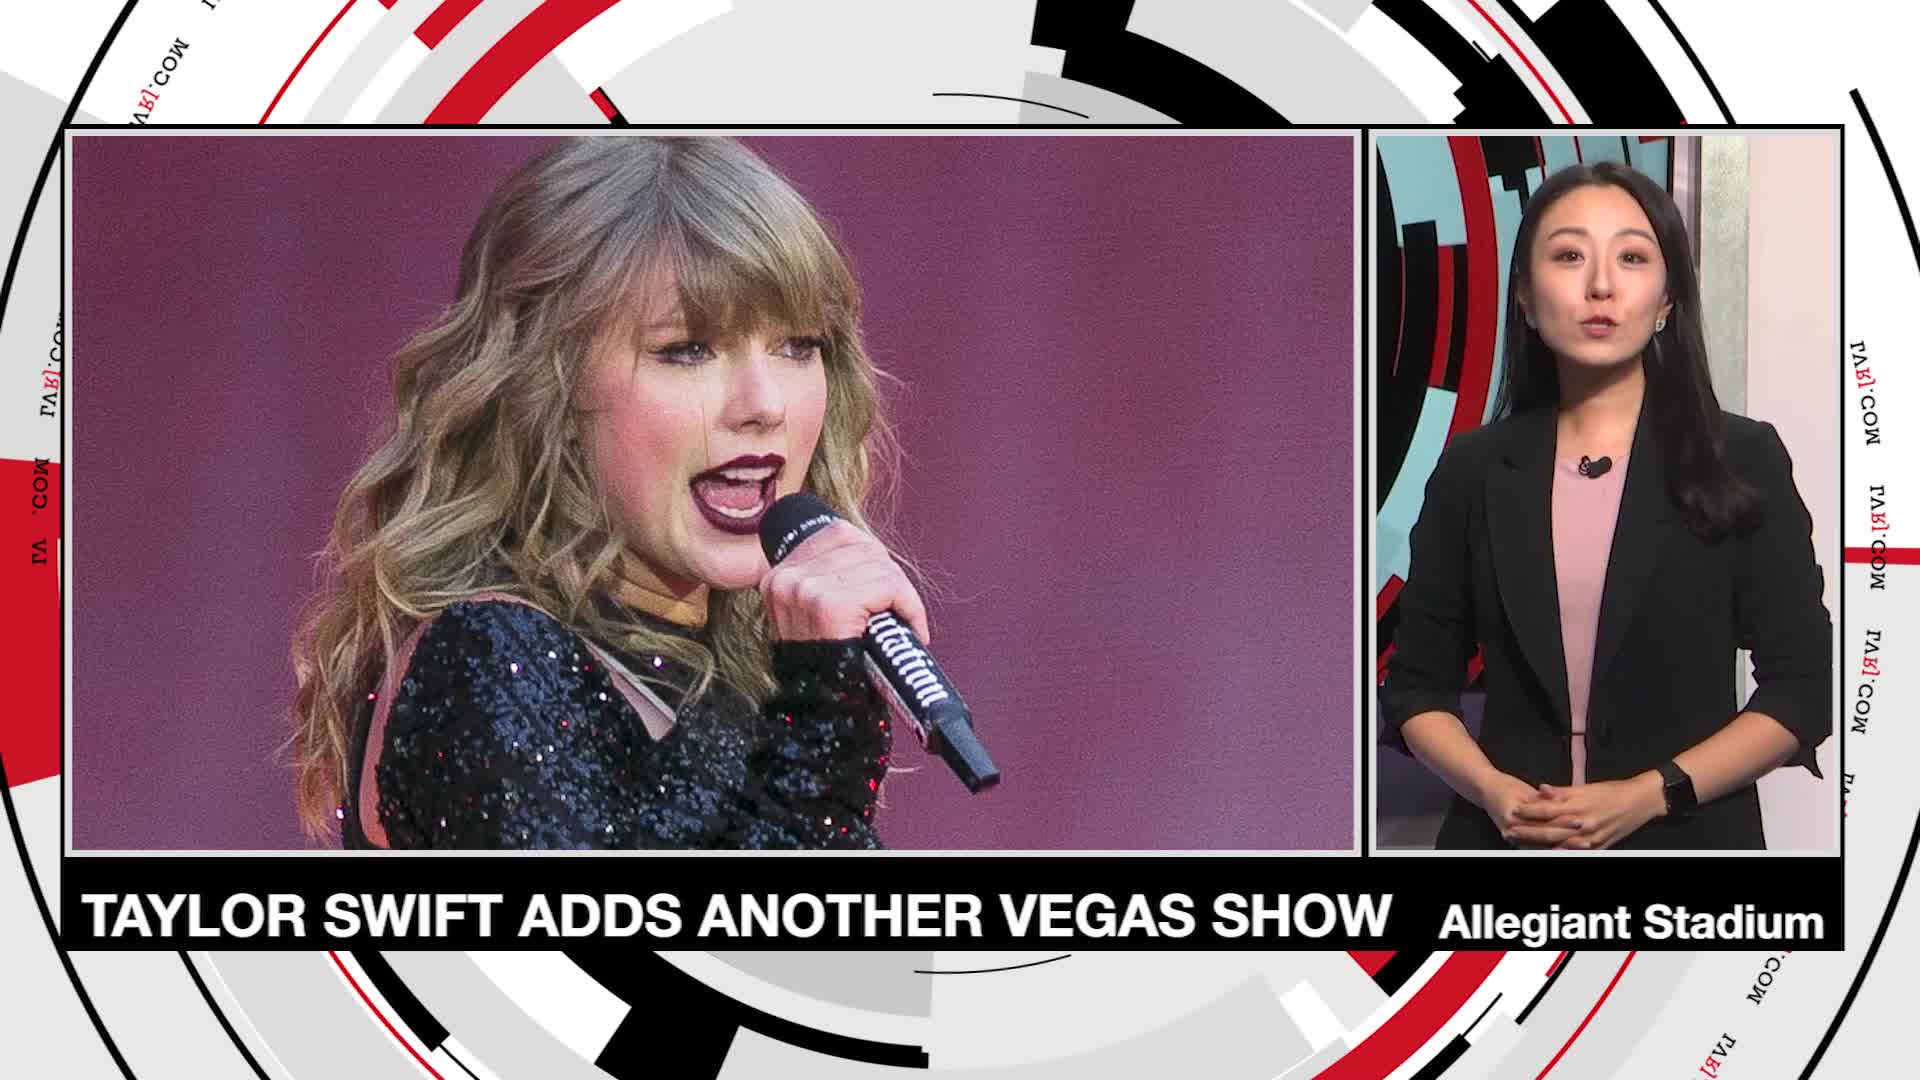 Taylor Swift adds another Vegas tour date